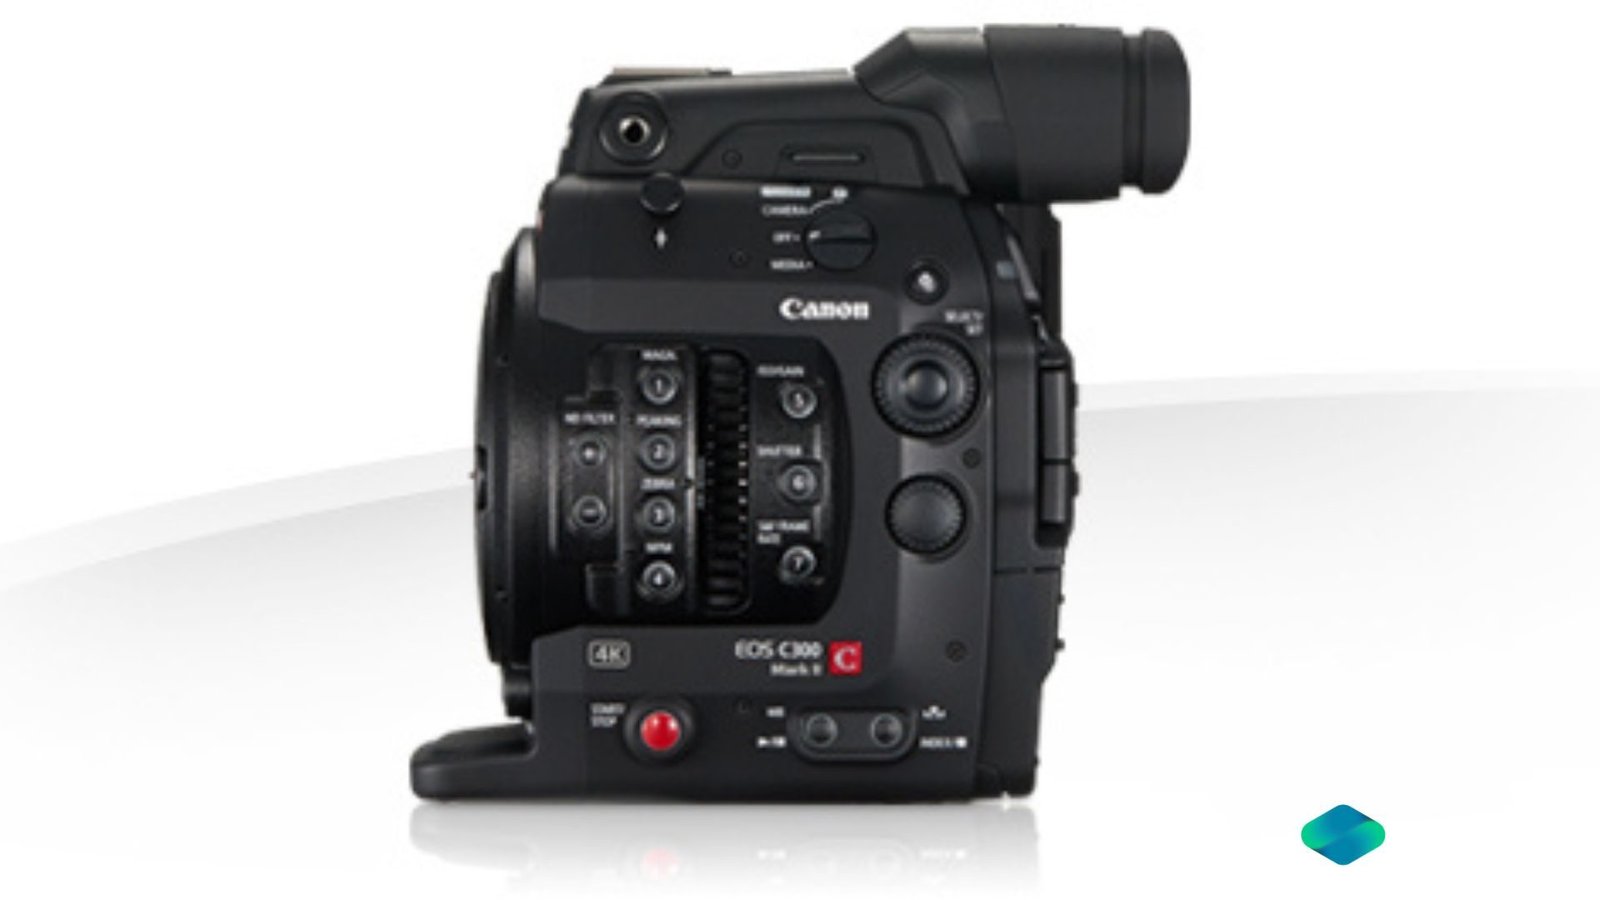 Rent Canon C-300 Mark II Camera With Canon Lens Kit in Delhi NCR, Camera accessories, Camera lenses for rent, in Delhi Gurgaon Noida, hire Shooting equipment, Lighting equipment rental, Film gear rental for Video production, camera rental company in Delhi, film equipment rental company